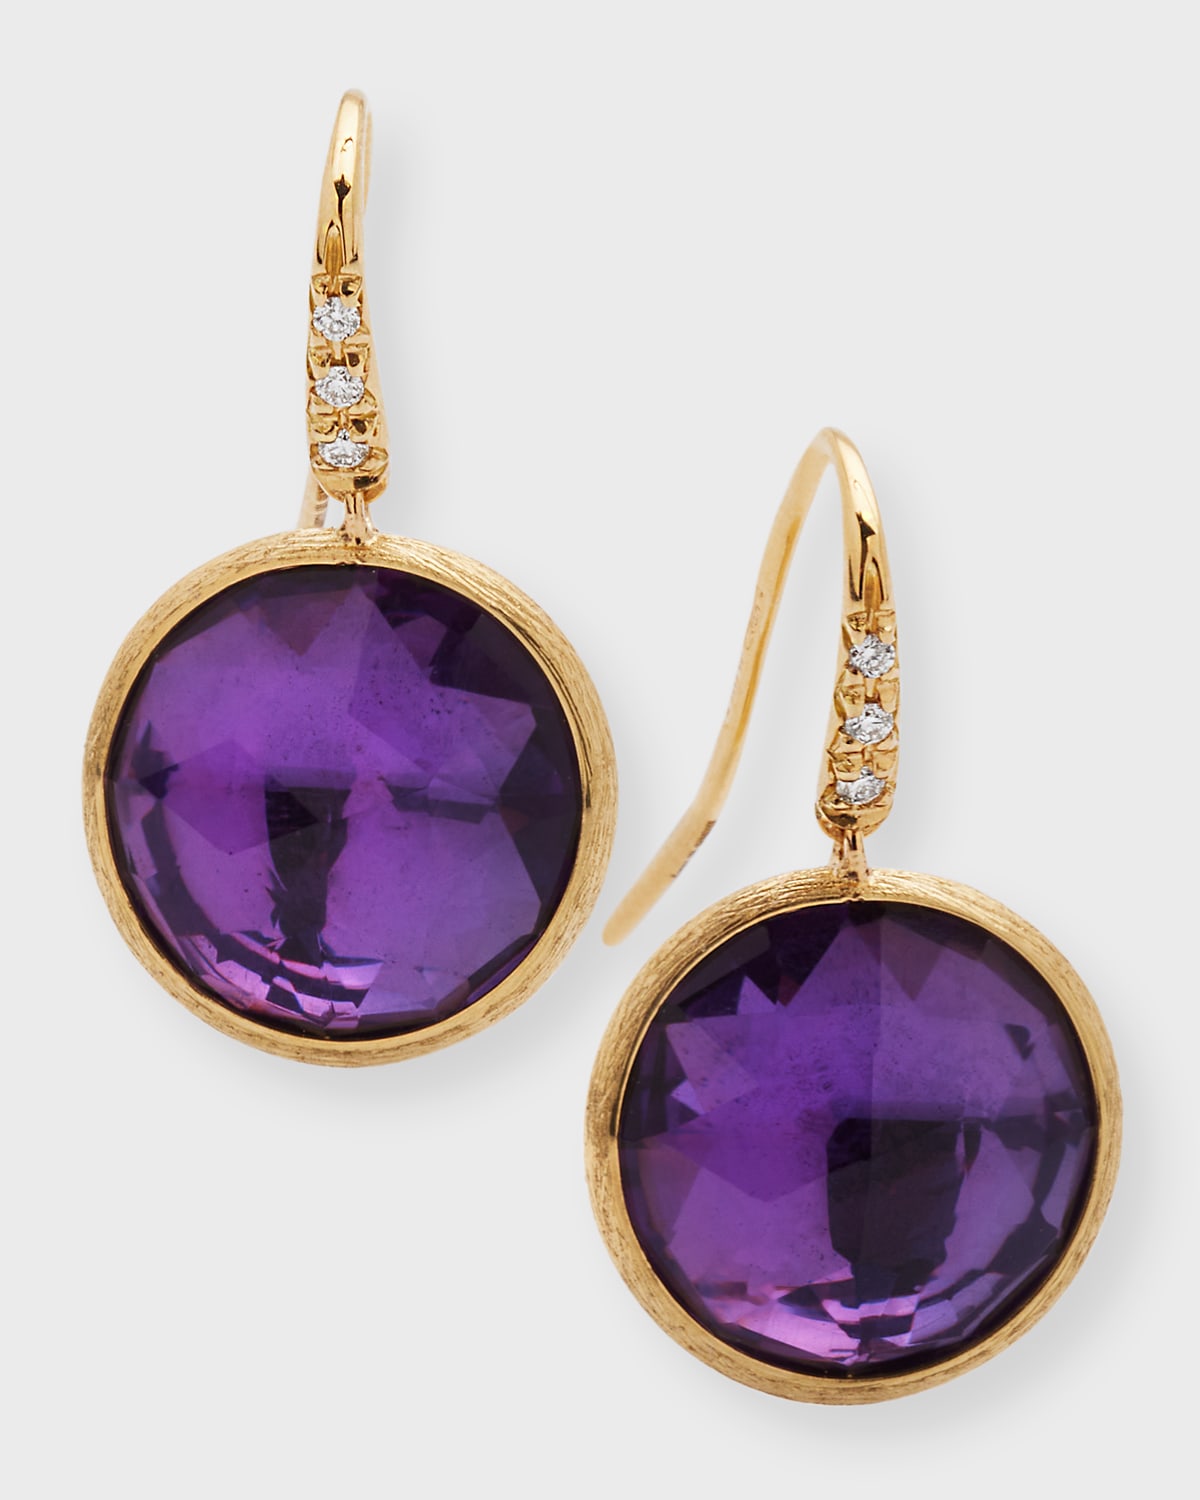 Marco Bicego Jaipur Color Drop Earrings with Diamonds and Amethyst